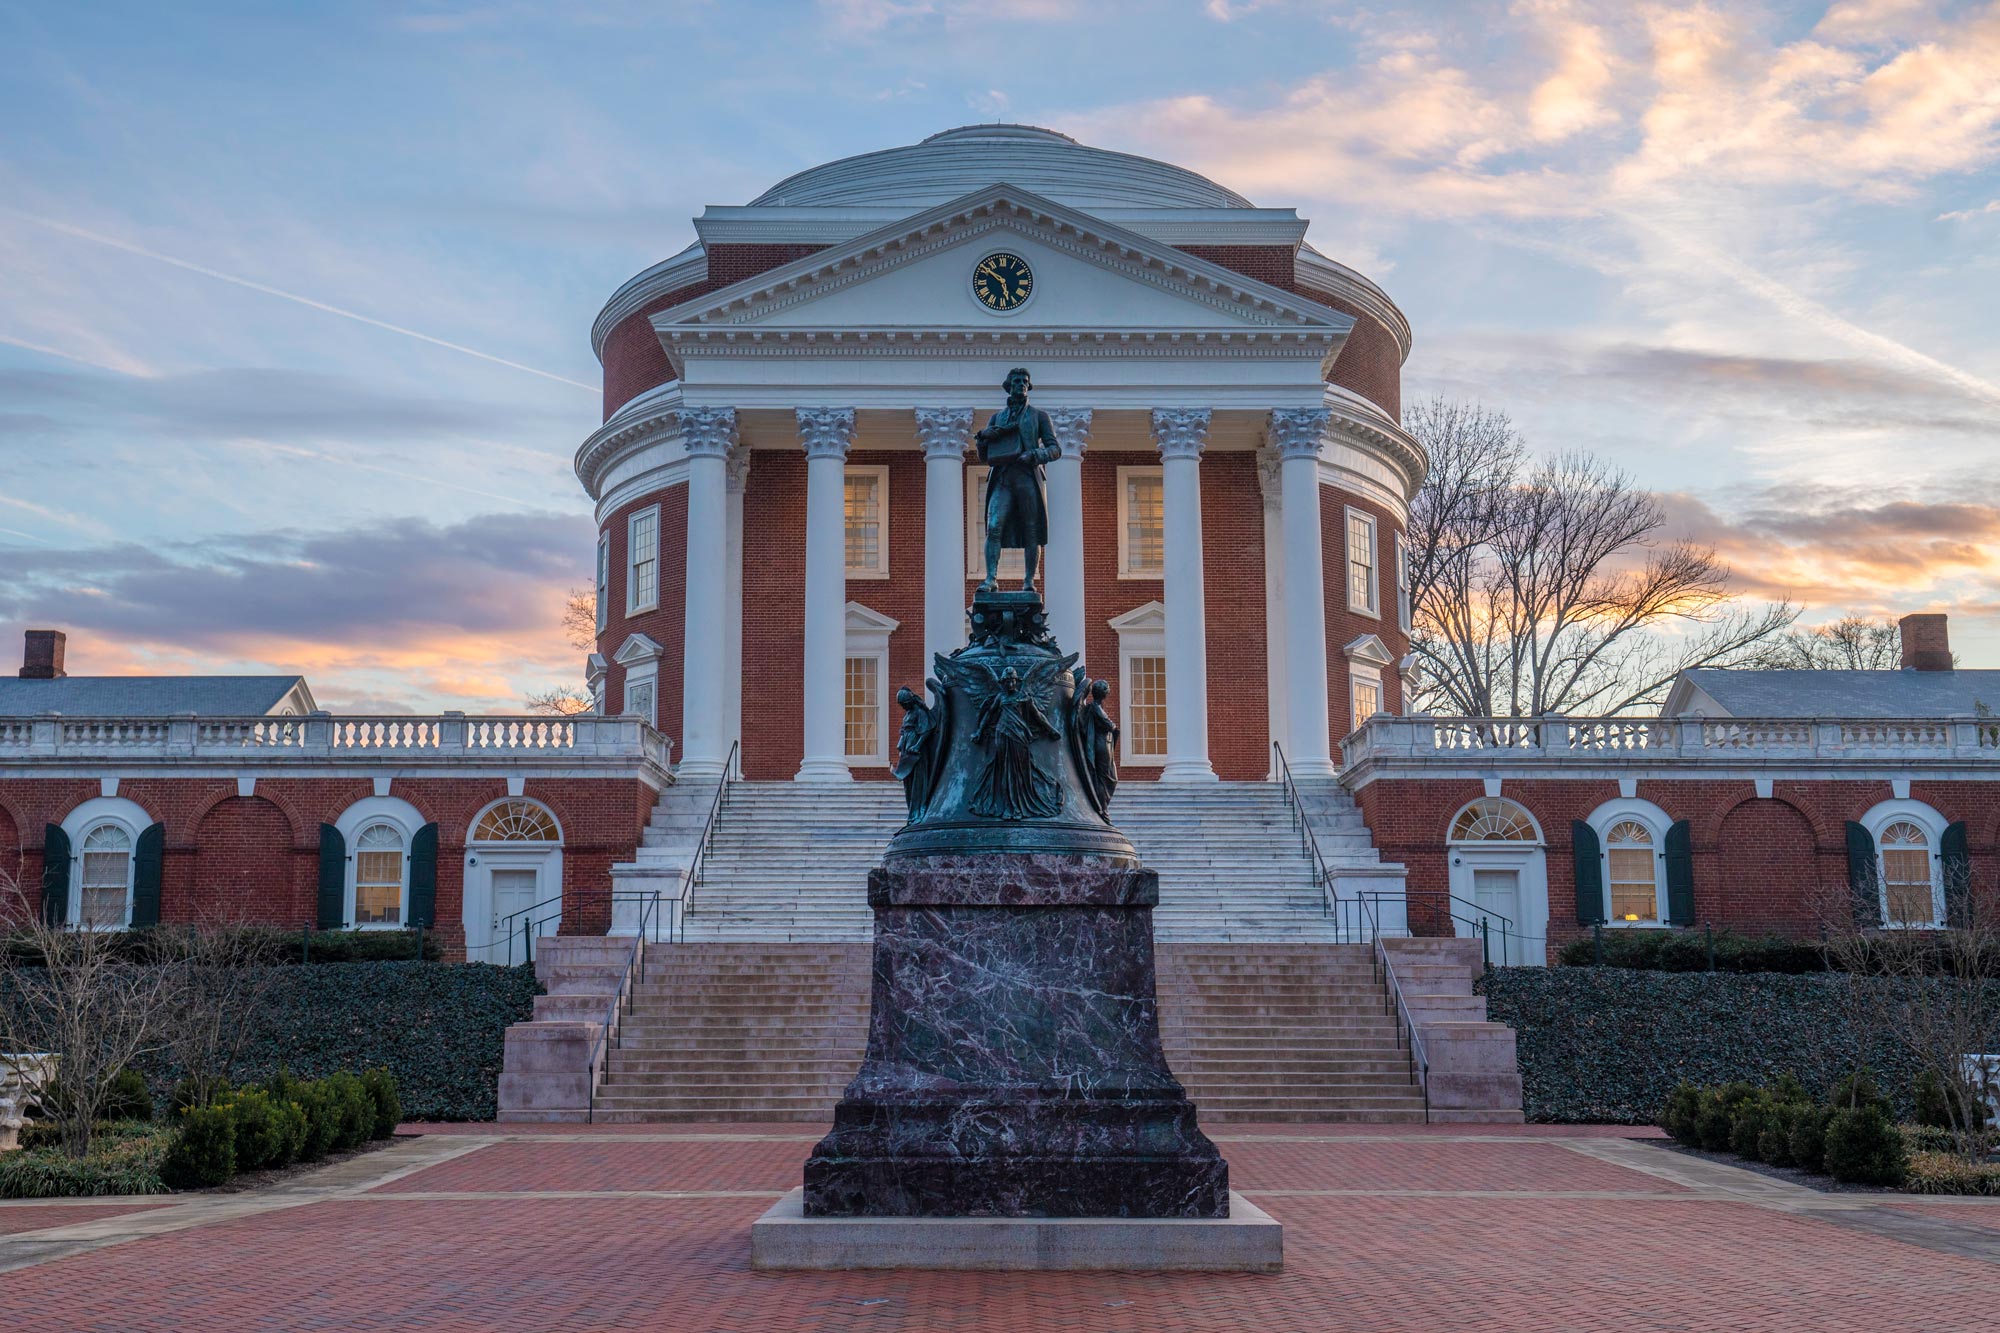 Accolades: Ranking Touts UVA as 'Best Value' in Virginia and One of the Best in America - UVA Today